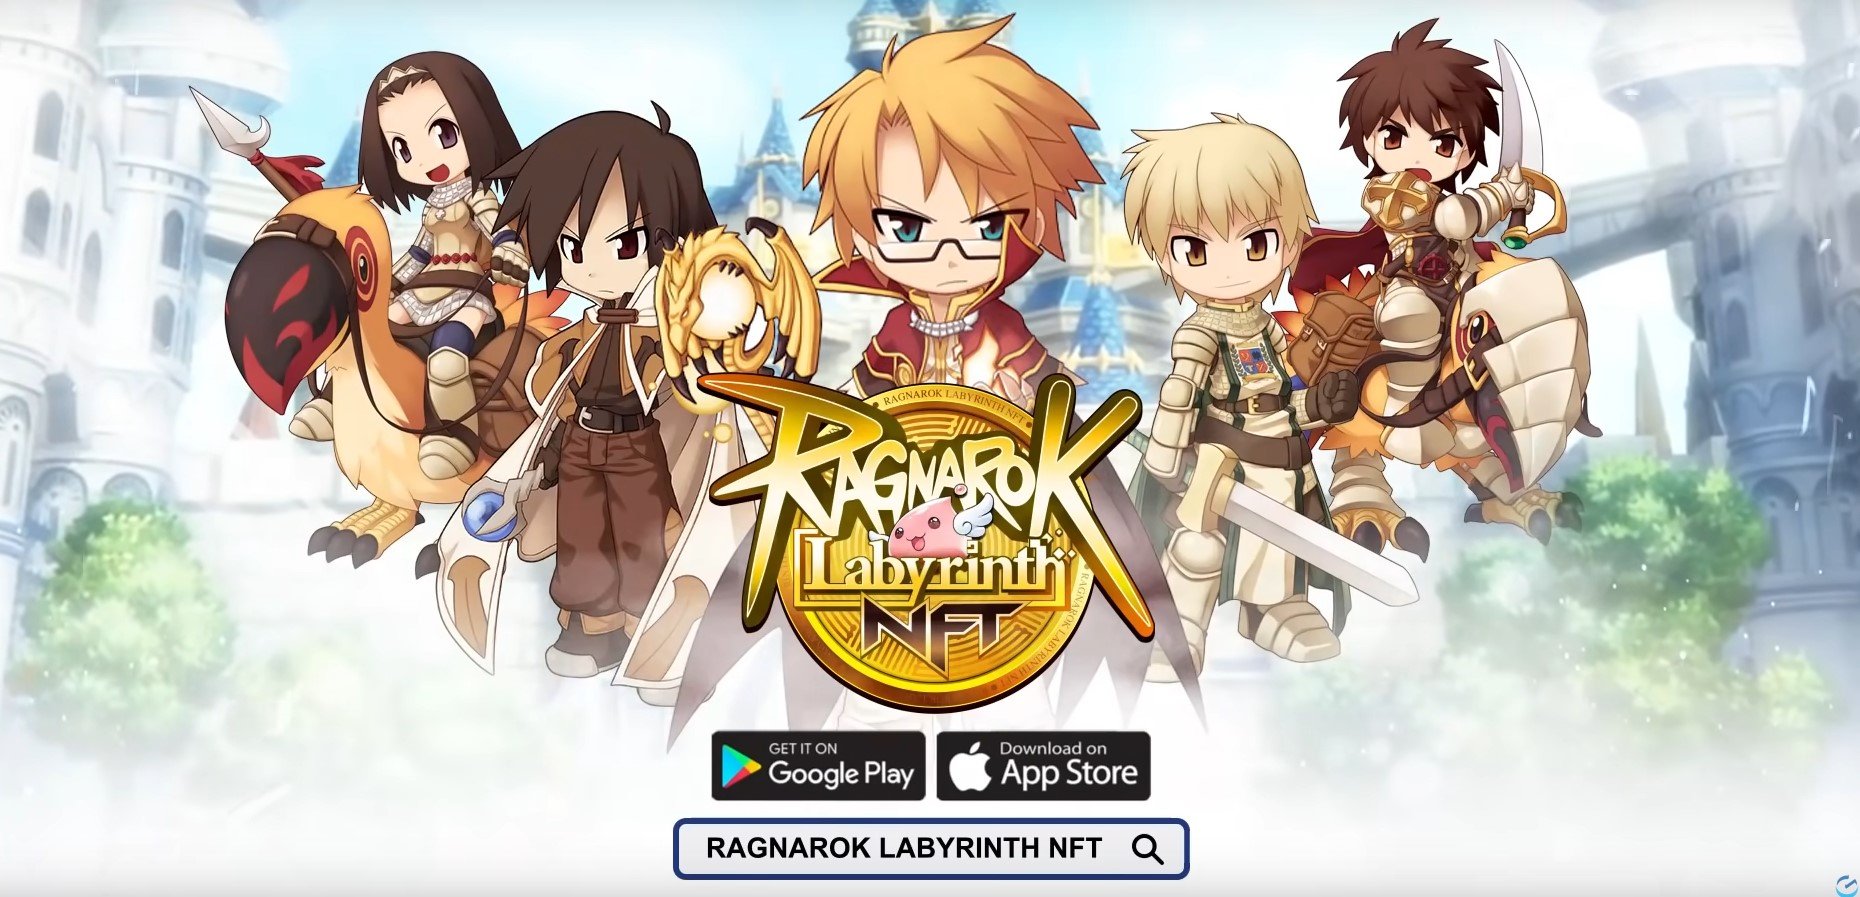 Ragnarok Labyrinth NFT Game to Release Globally this September